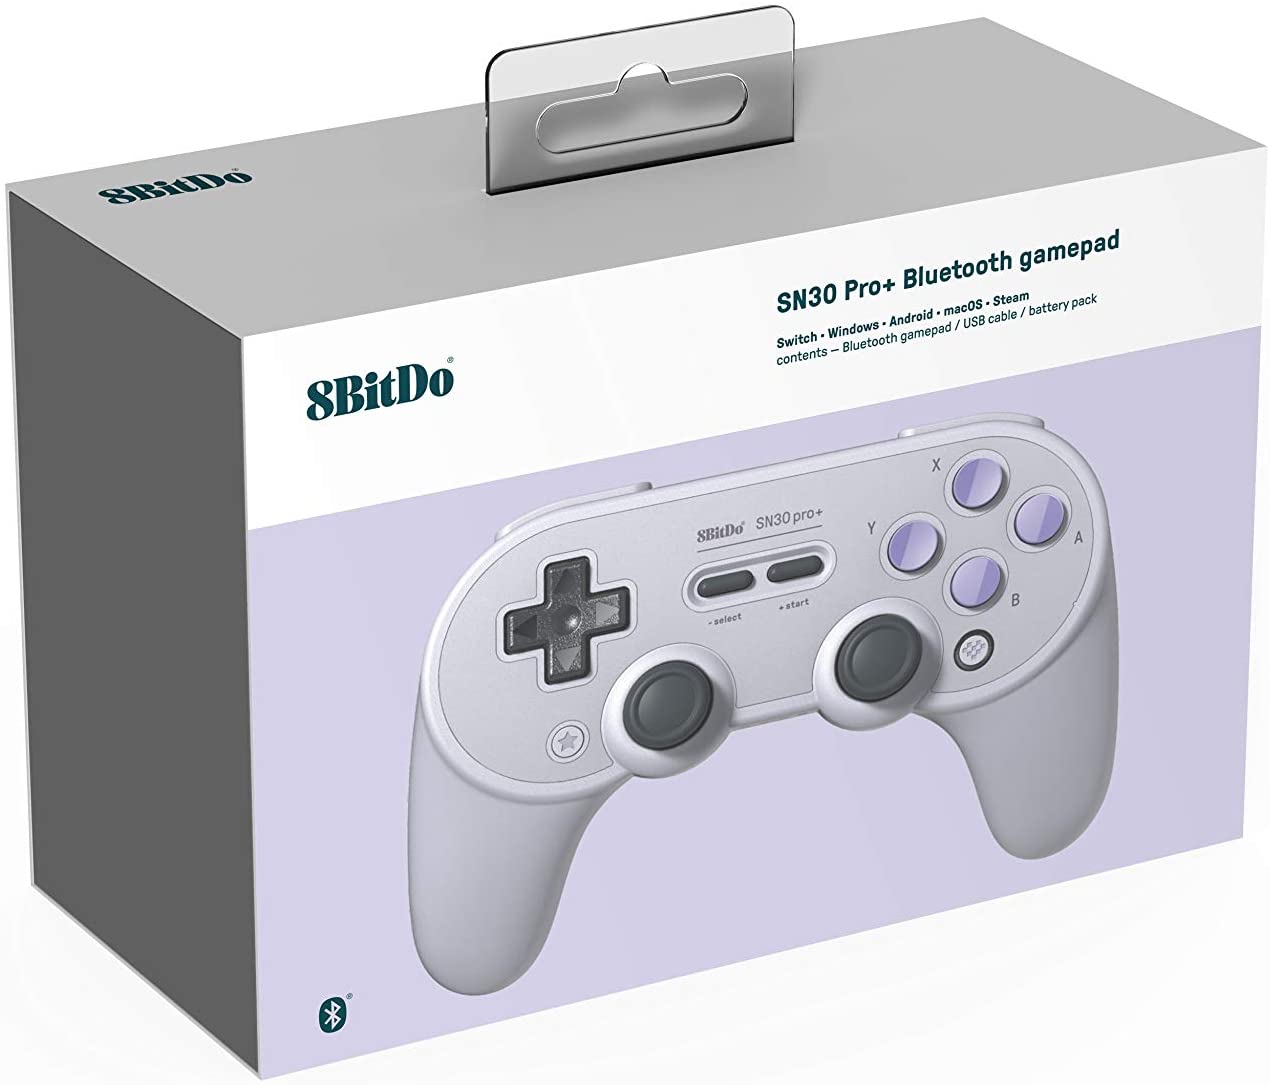 8Bitdo Sn30 Pro+ Bluetooth Gamepad for Switch, PC, macOS, Android, Steam and Raspberry Pi (SN Edition) - e4cents